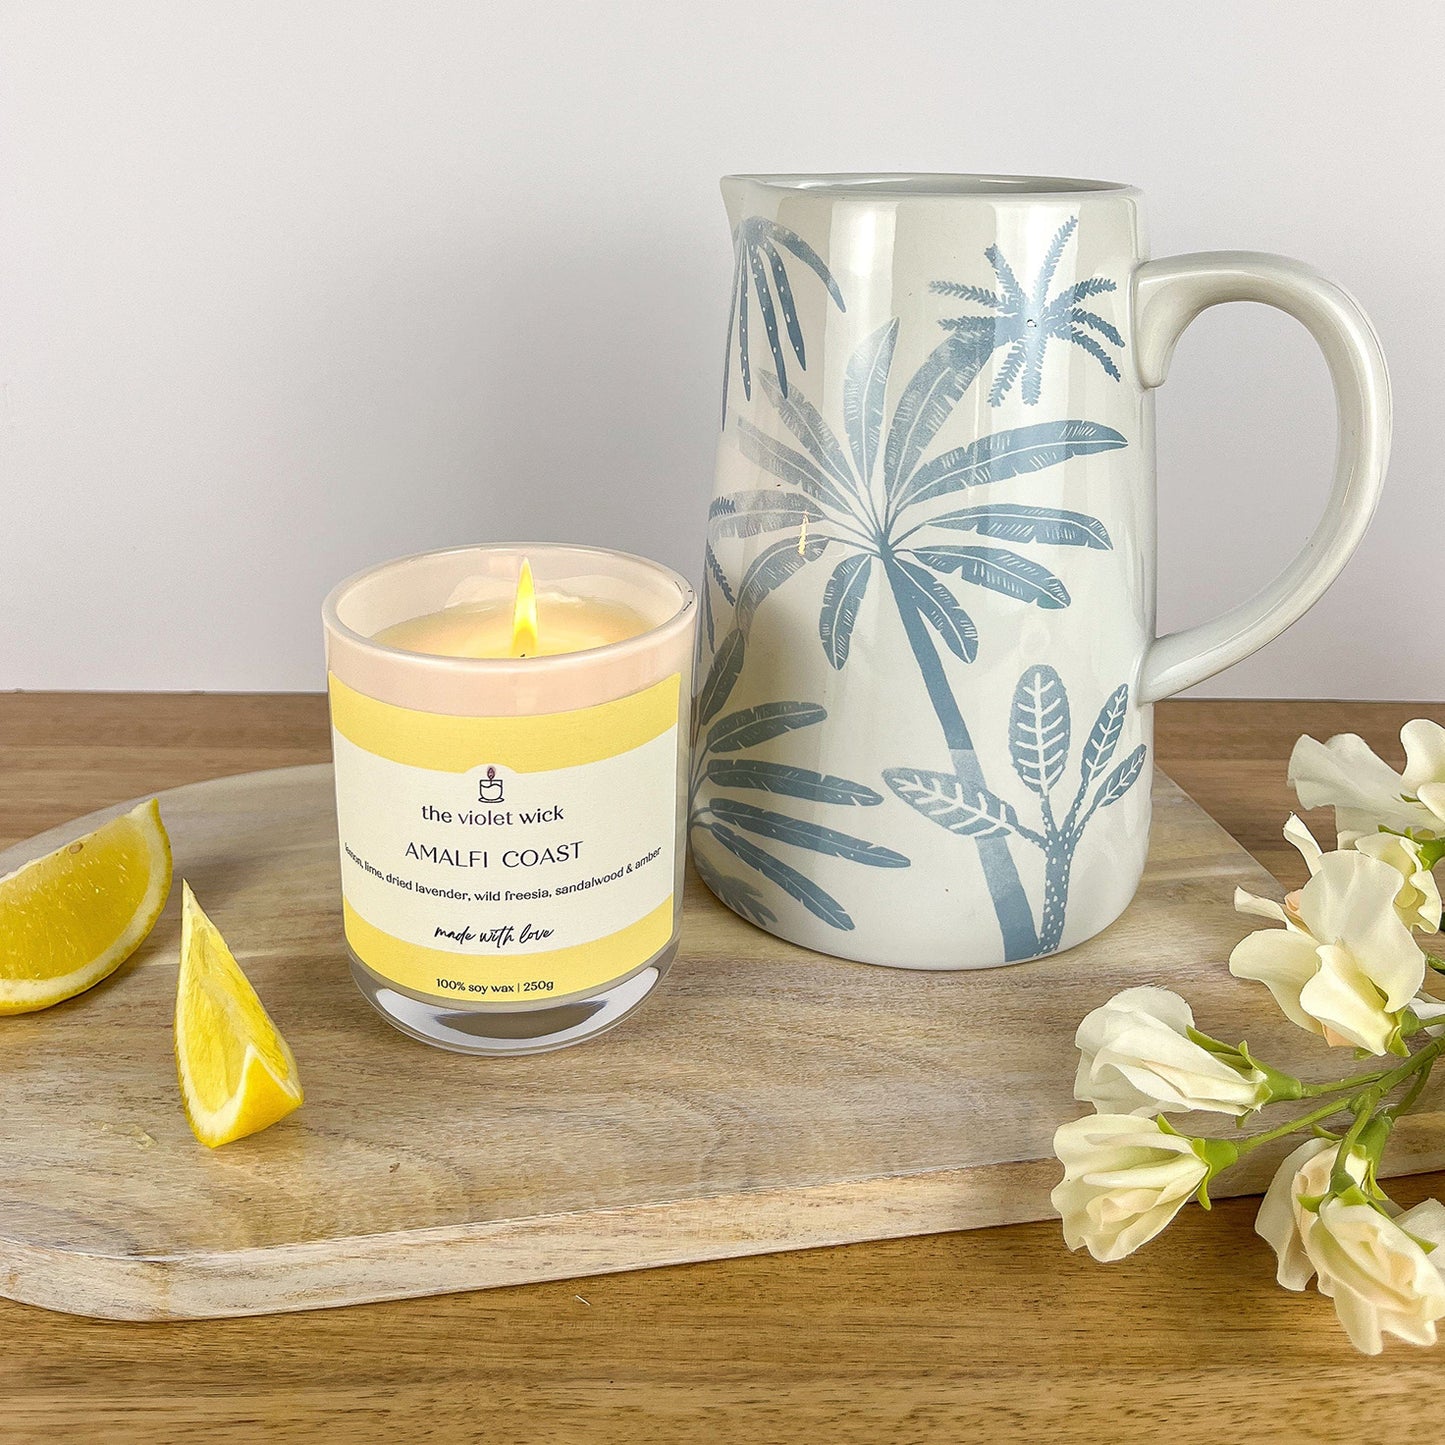 Amalfi Coast scented soy candle from The Violet Wick on a serving tray with lemon slices, a jug and flowers. In a glass jar with timber lid, 250g.